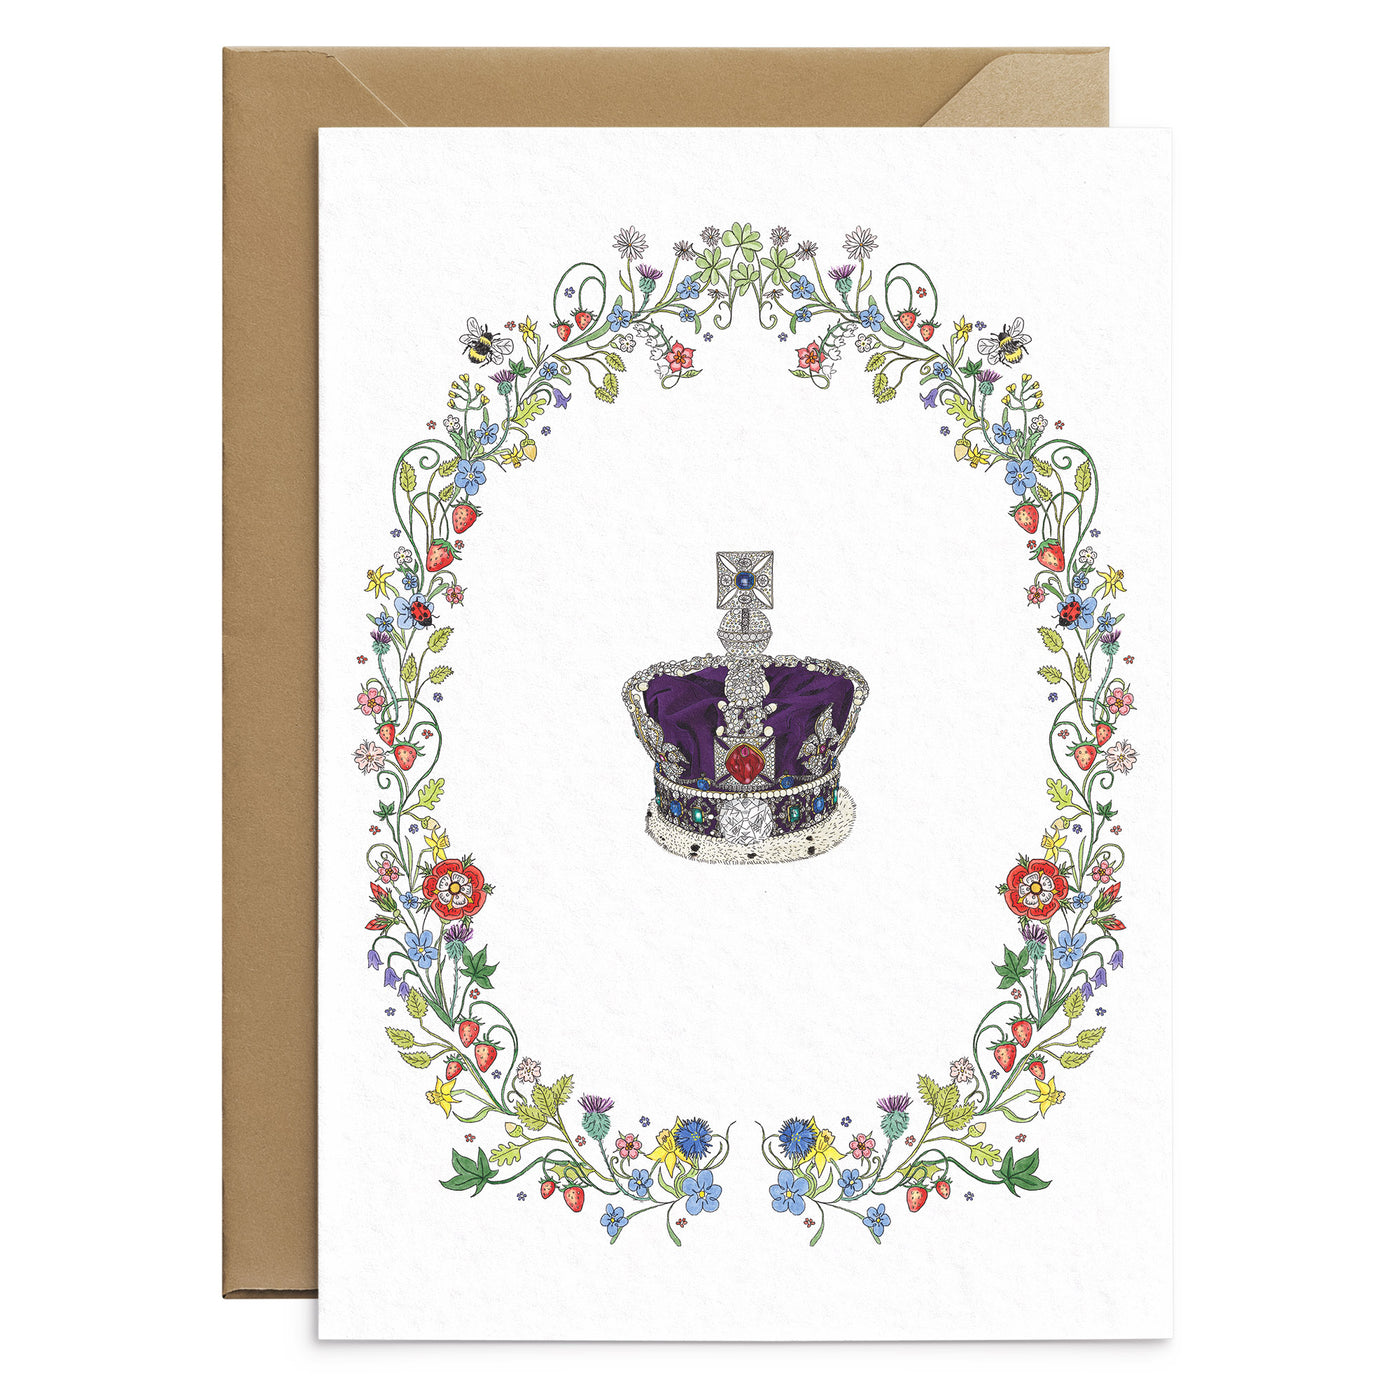 King-Charles-Coronation-Invitation-Crown-Jewels-Illustrated-Greetings-Card-Poppins-and-co